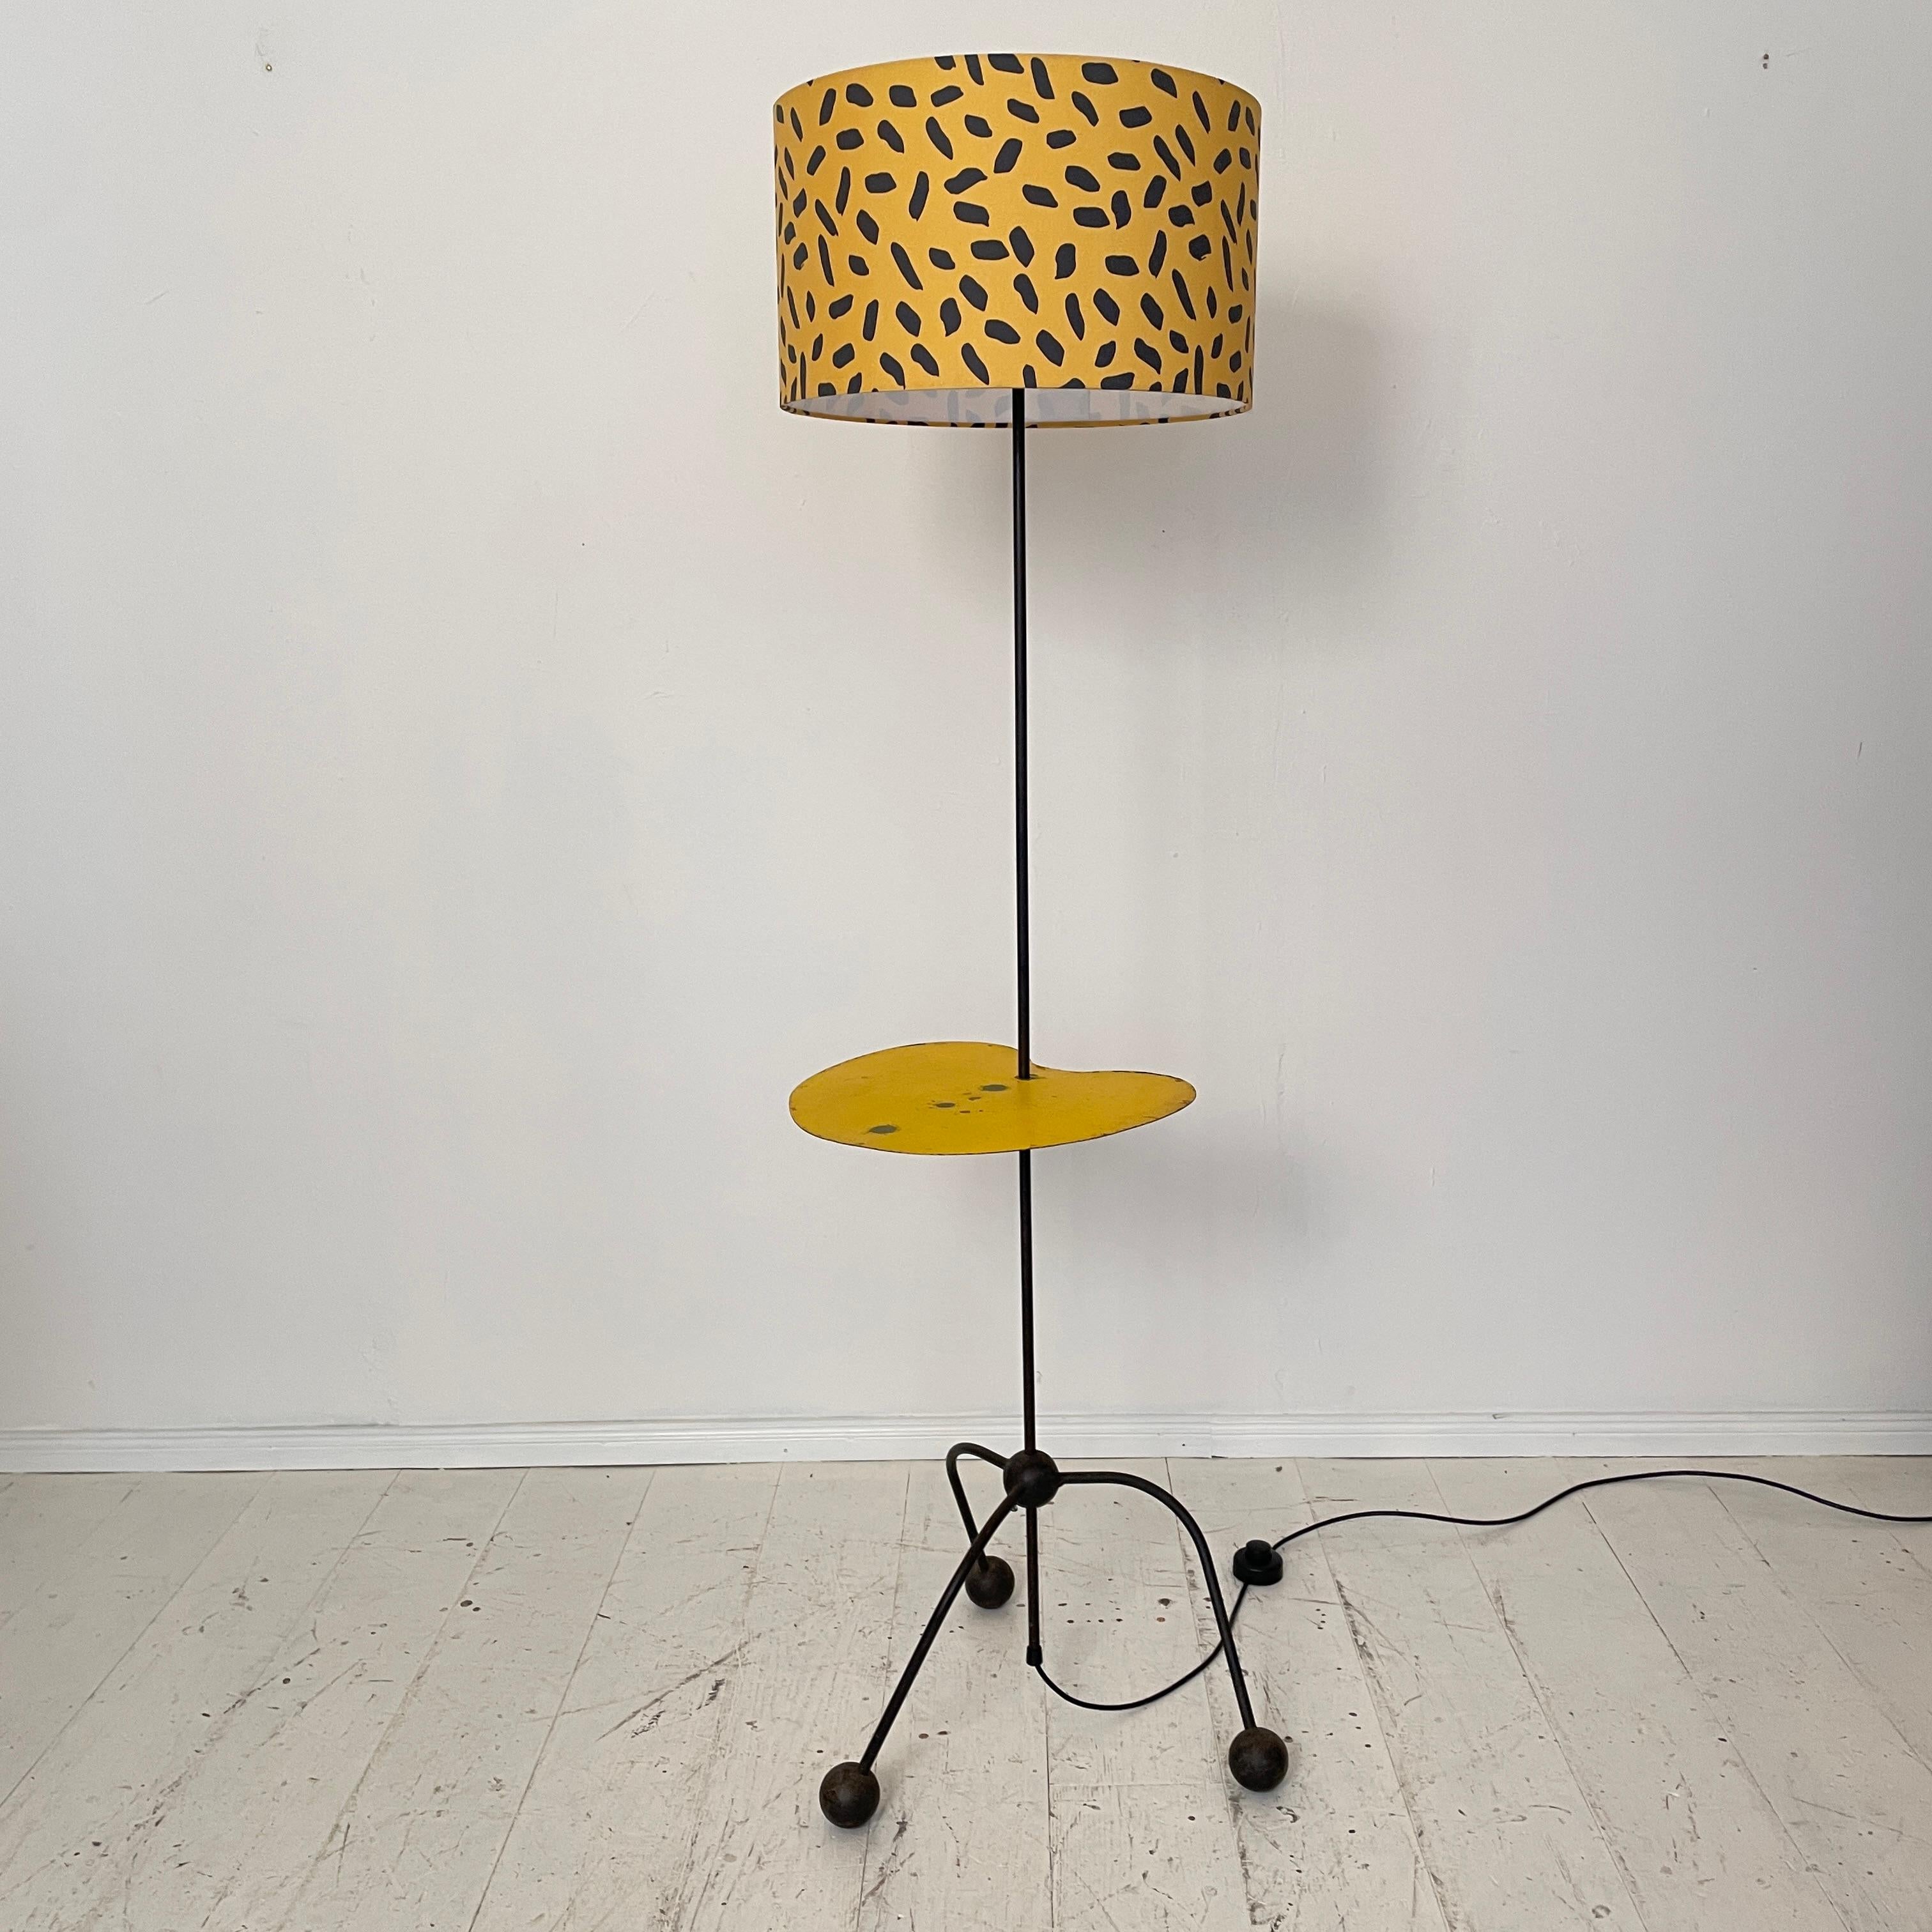 This beautiful mid-century French floor lamp was made in the 1950s.
It is a one of a kind piece.
The lampshade has been renewed and the table is adjustable in height.
It is made out of black lacquered metal and has got a yellow fabric shade.
A